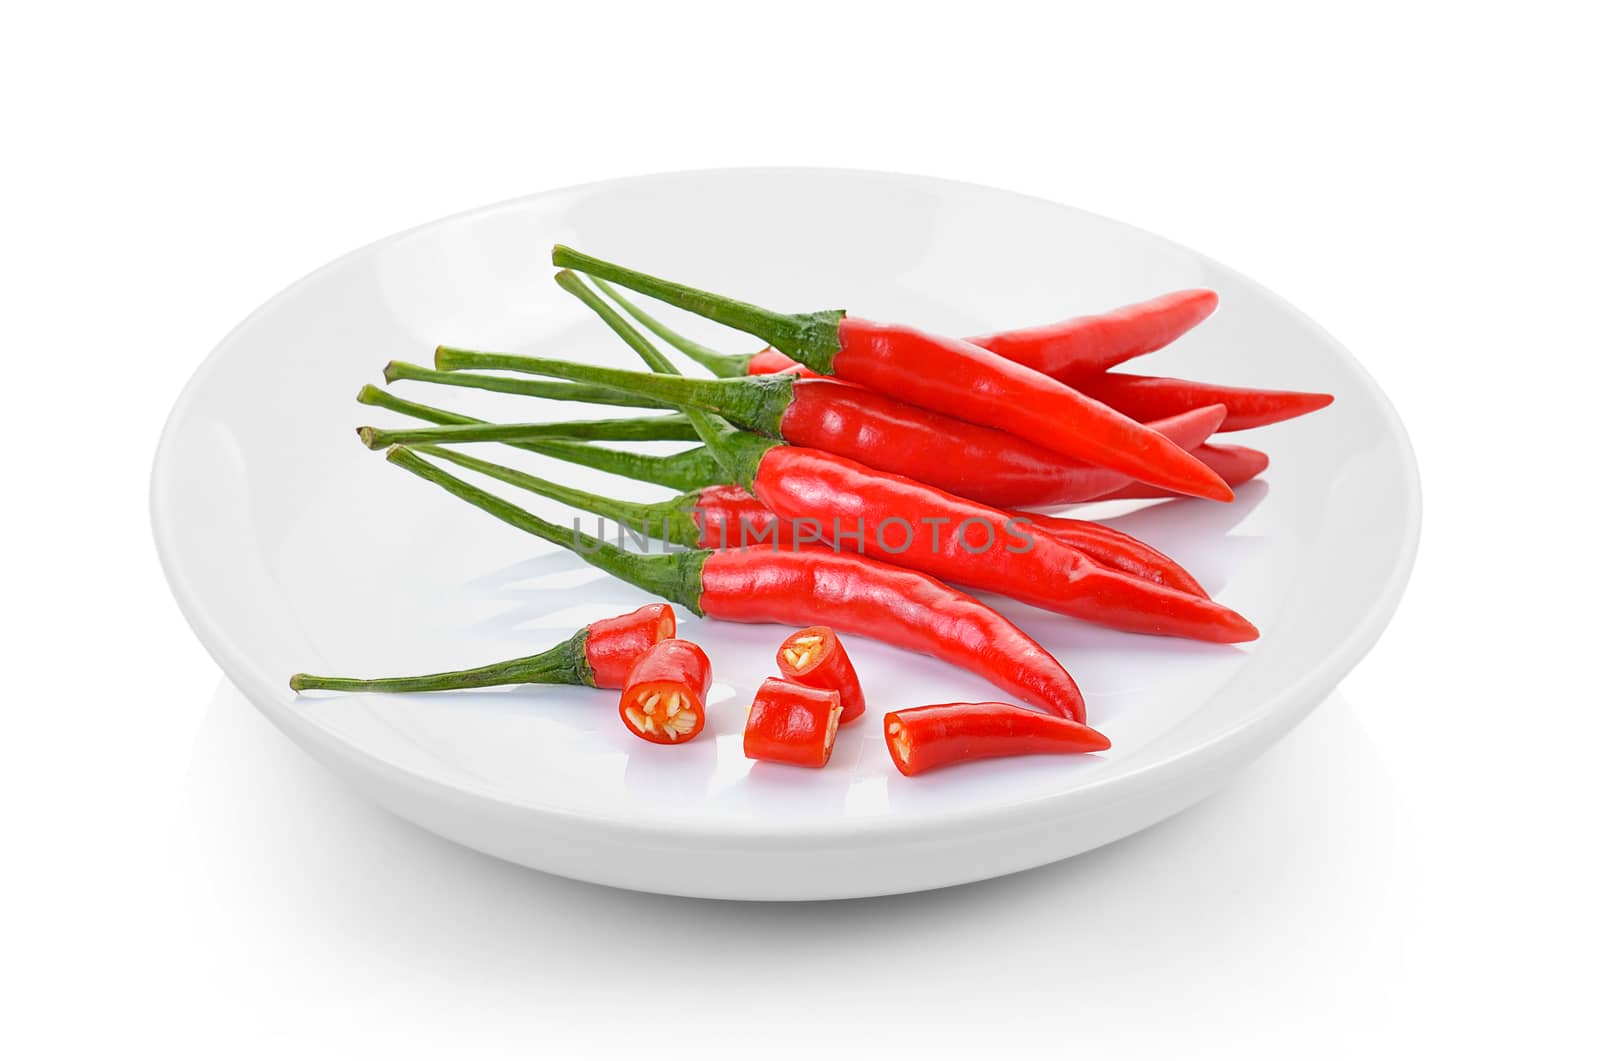 red chili peppers in plate on white background